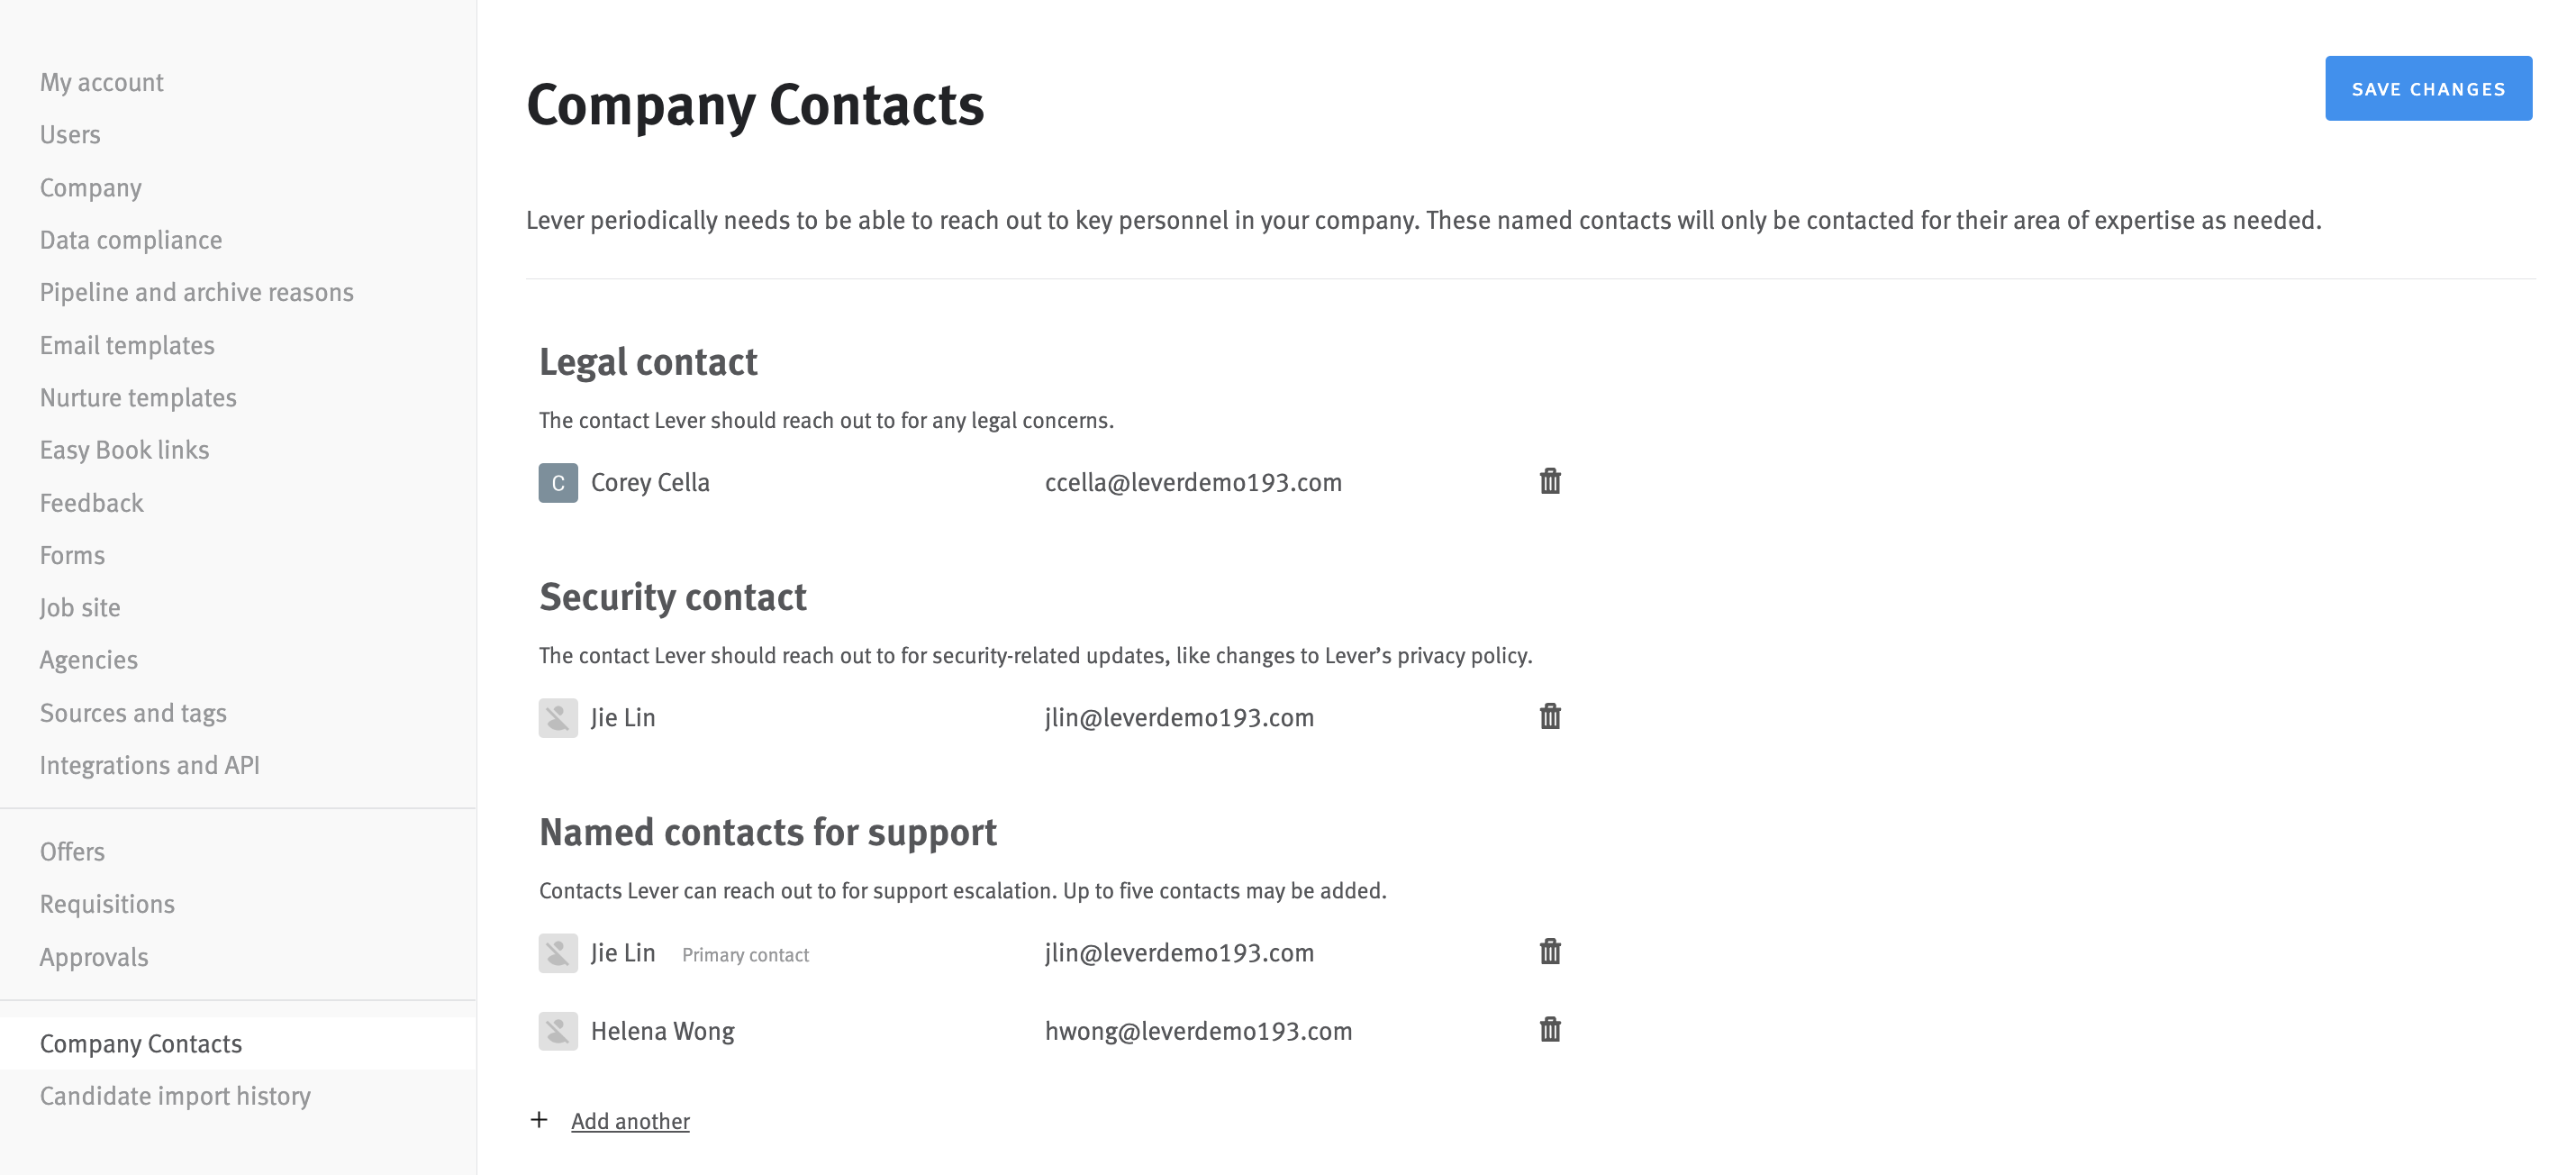 Company contacts page